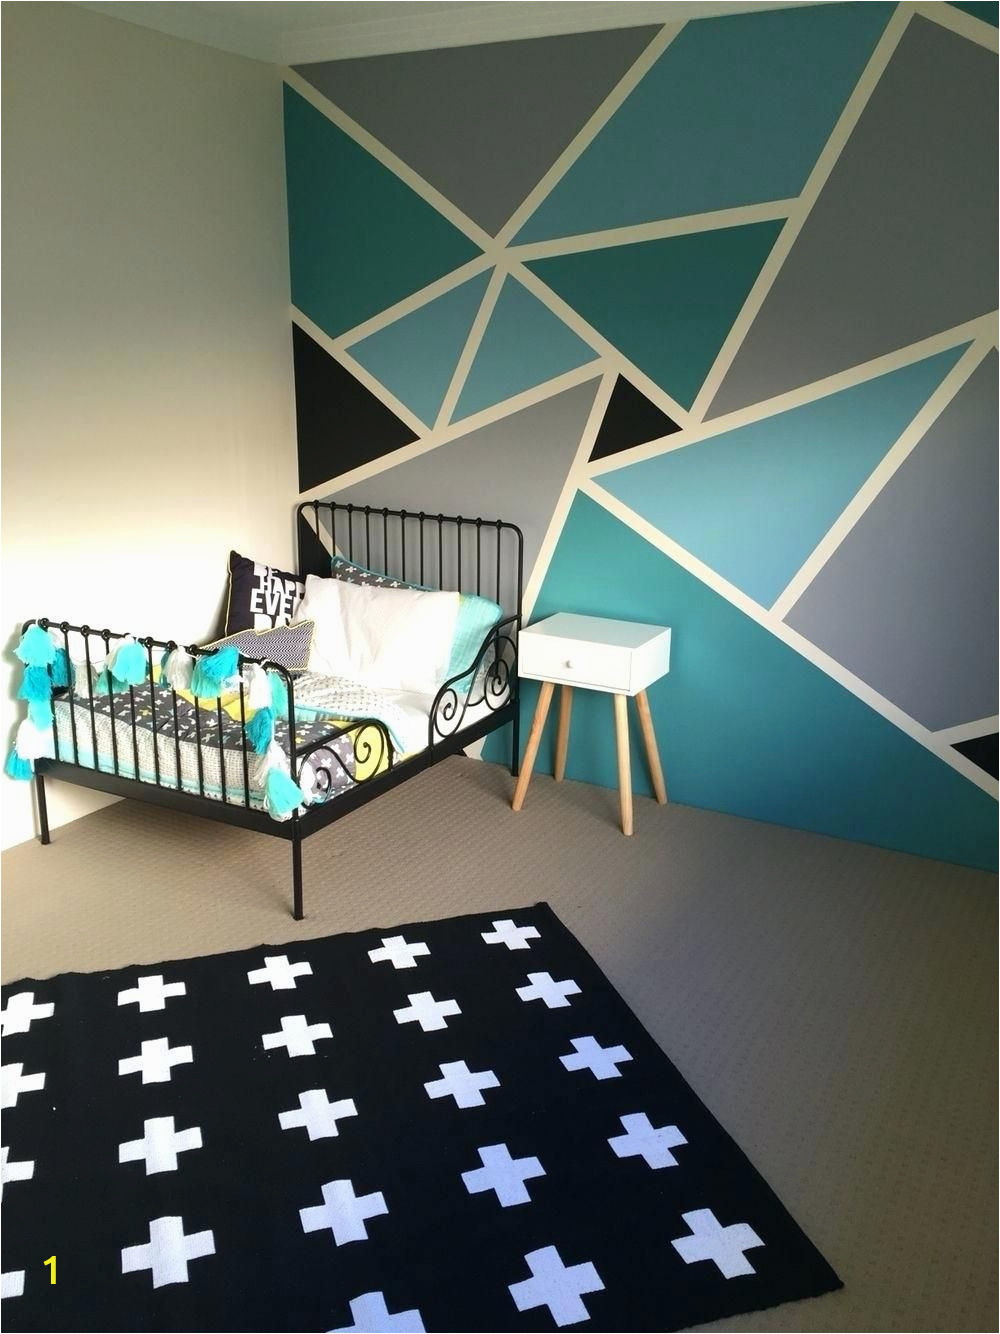 Best Paint for Indoor Wall Mural Best Of Wall Paint Design Ideas with Tape and Geometric Wall